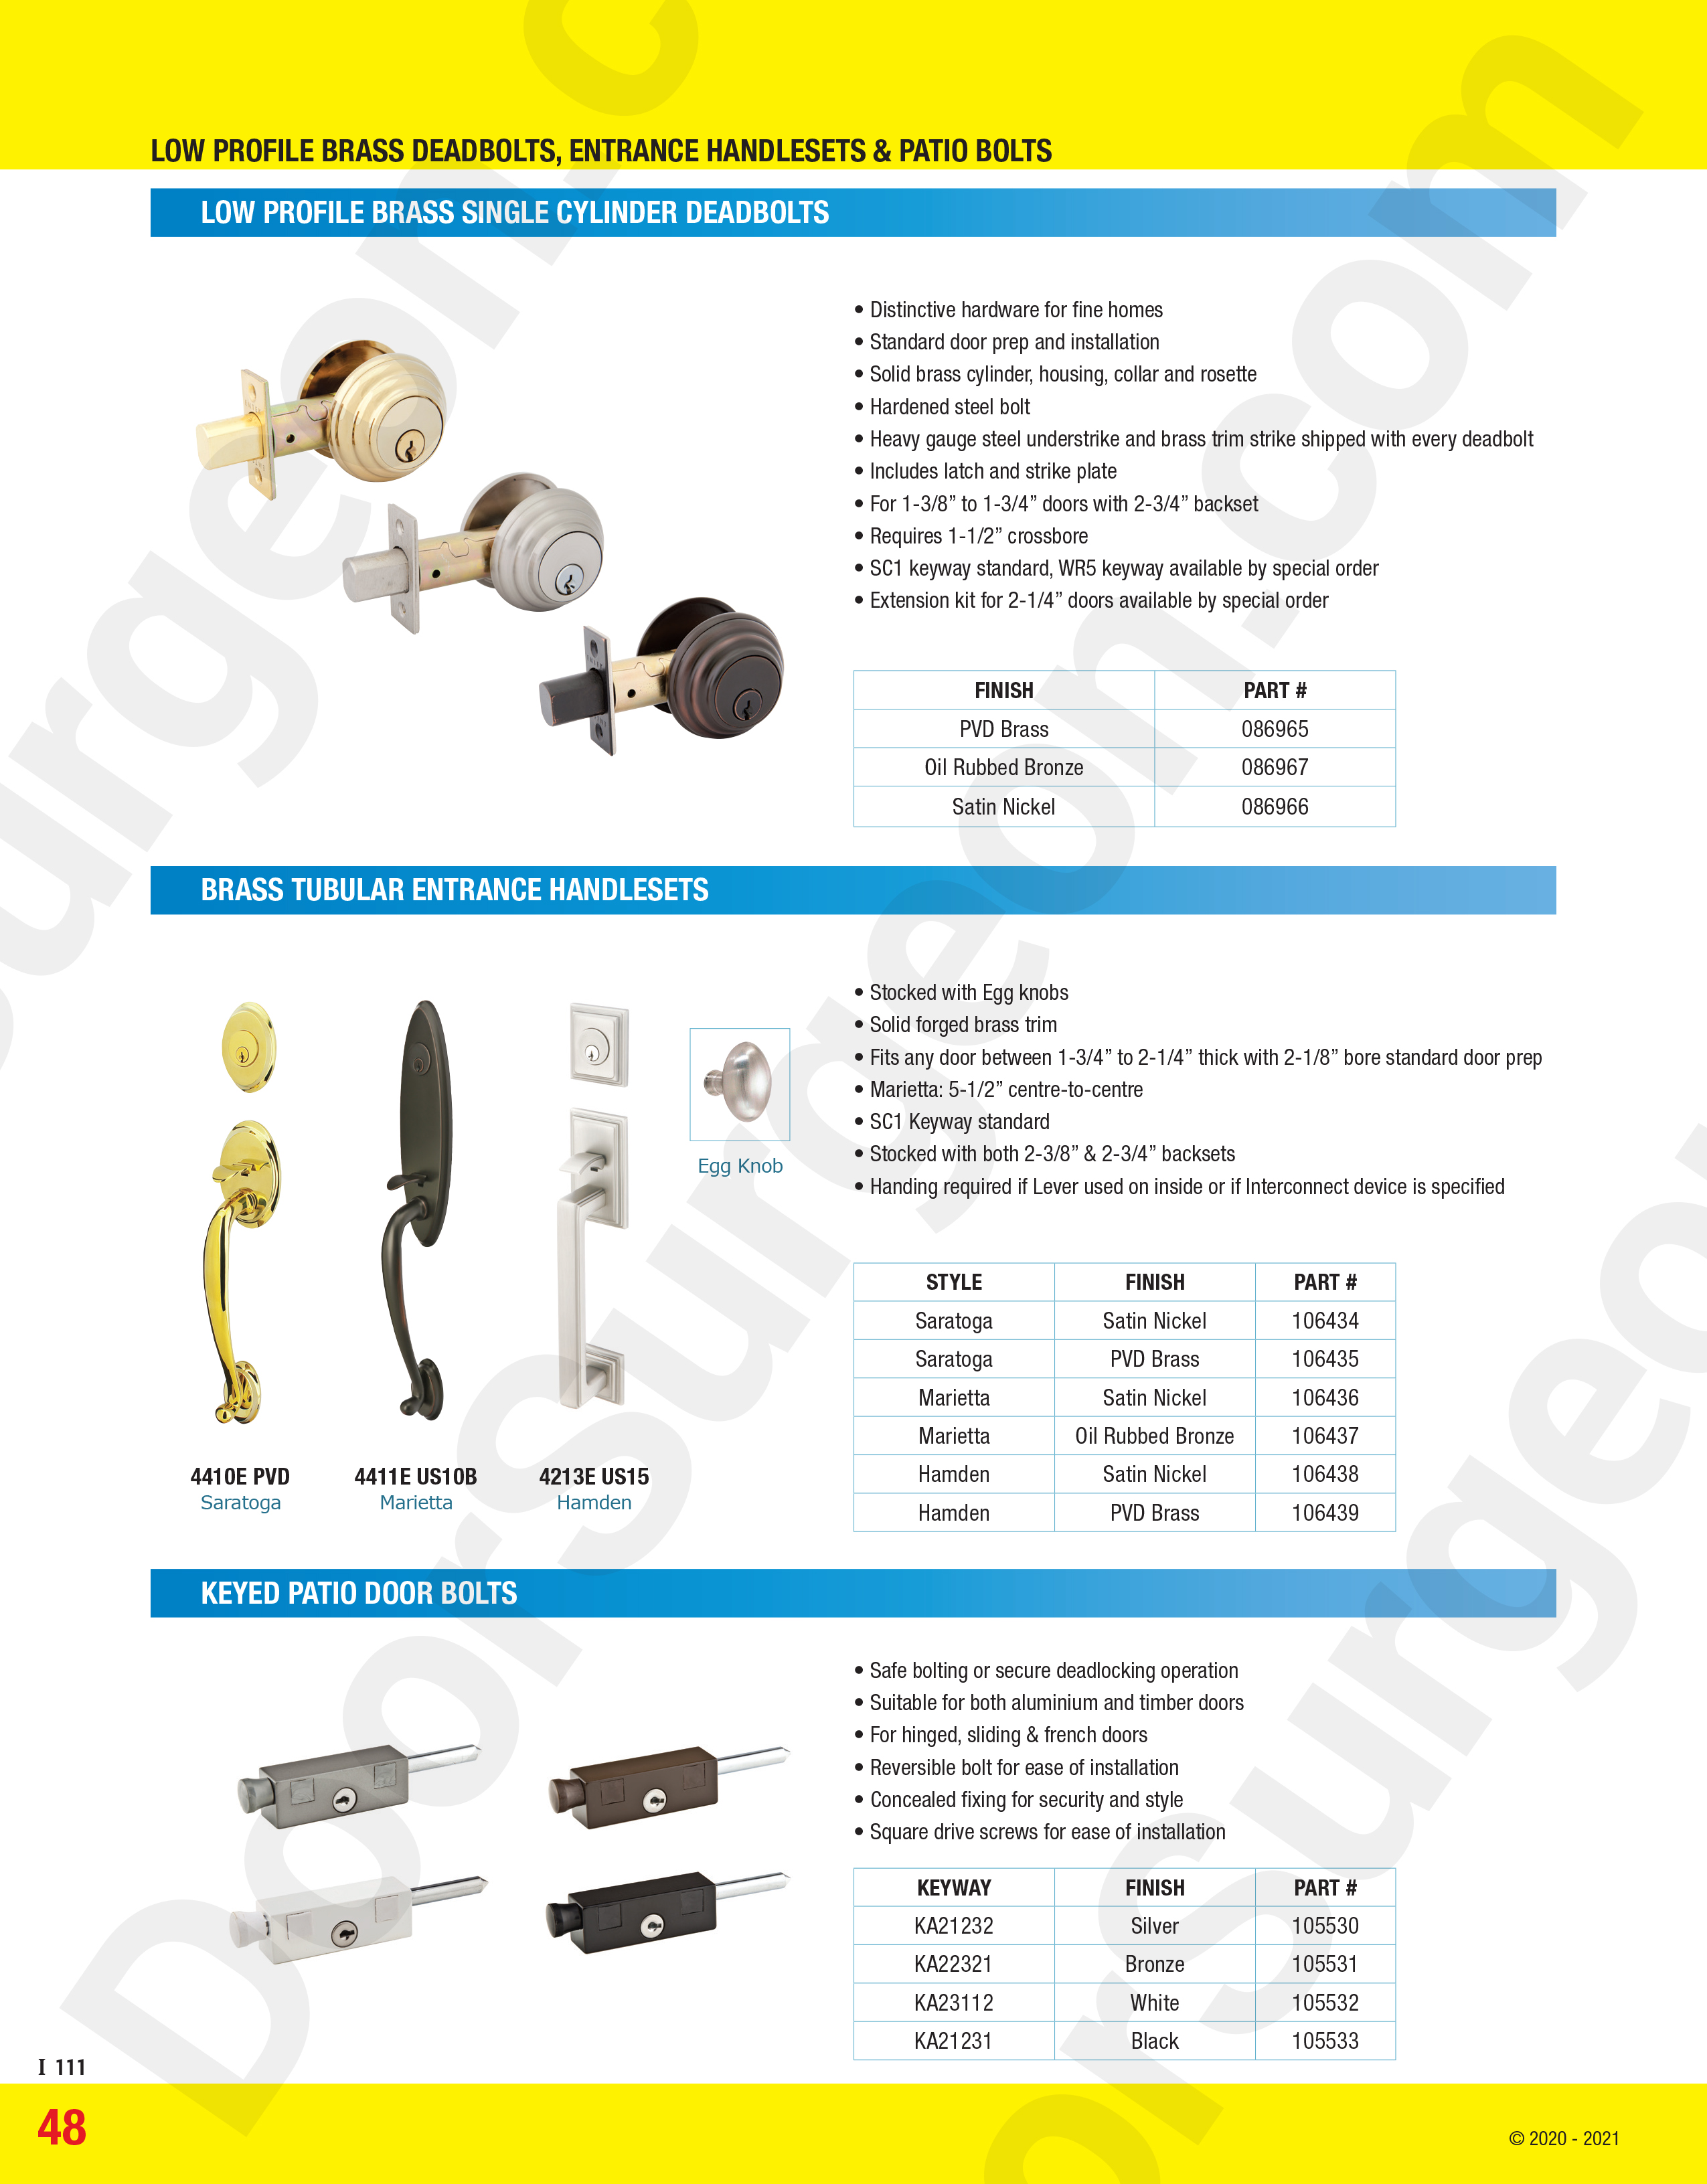 made for style and function schlage deadbolts and handles. Secondary locking Patio pins